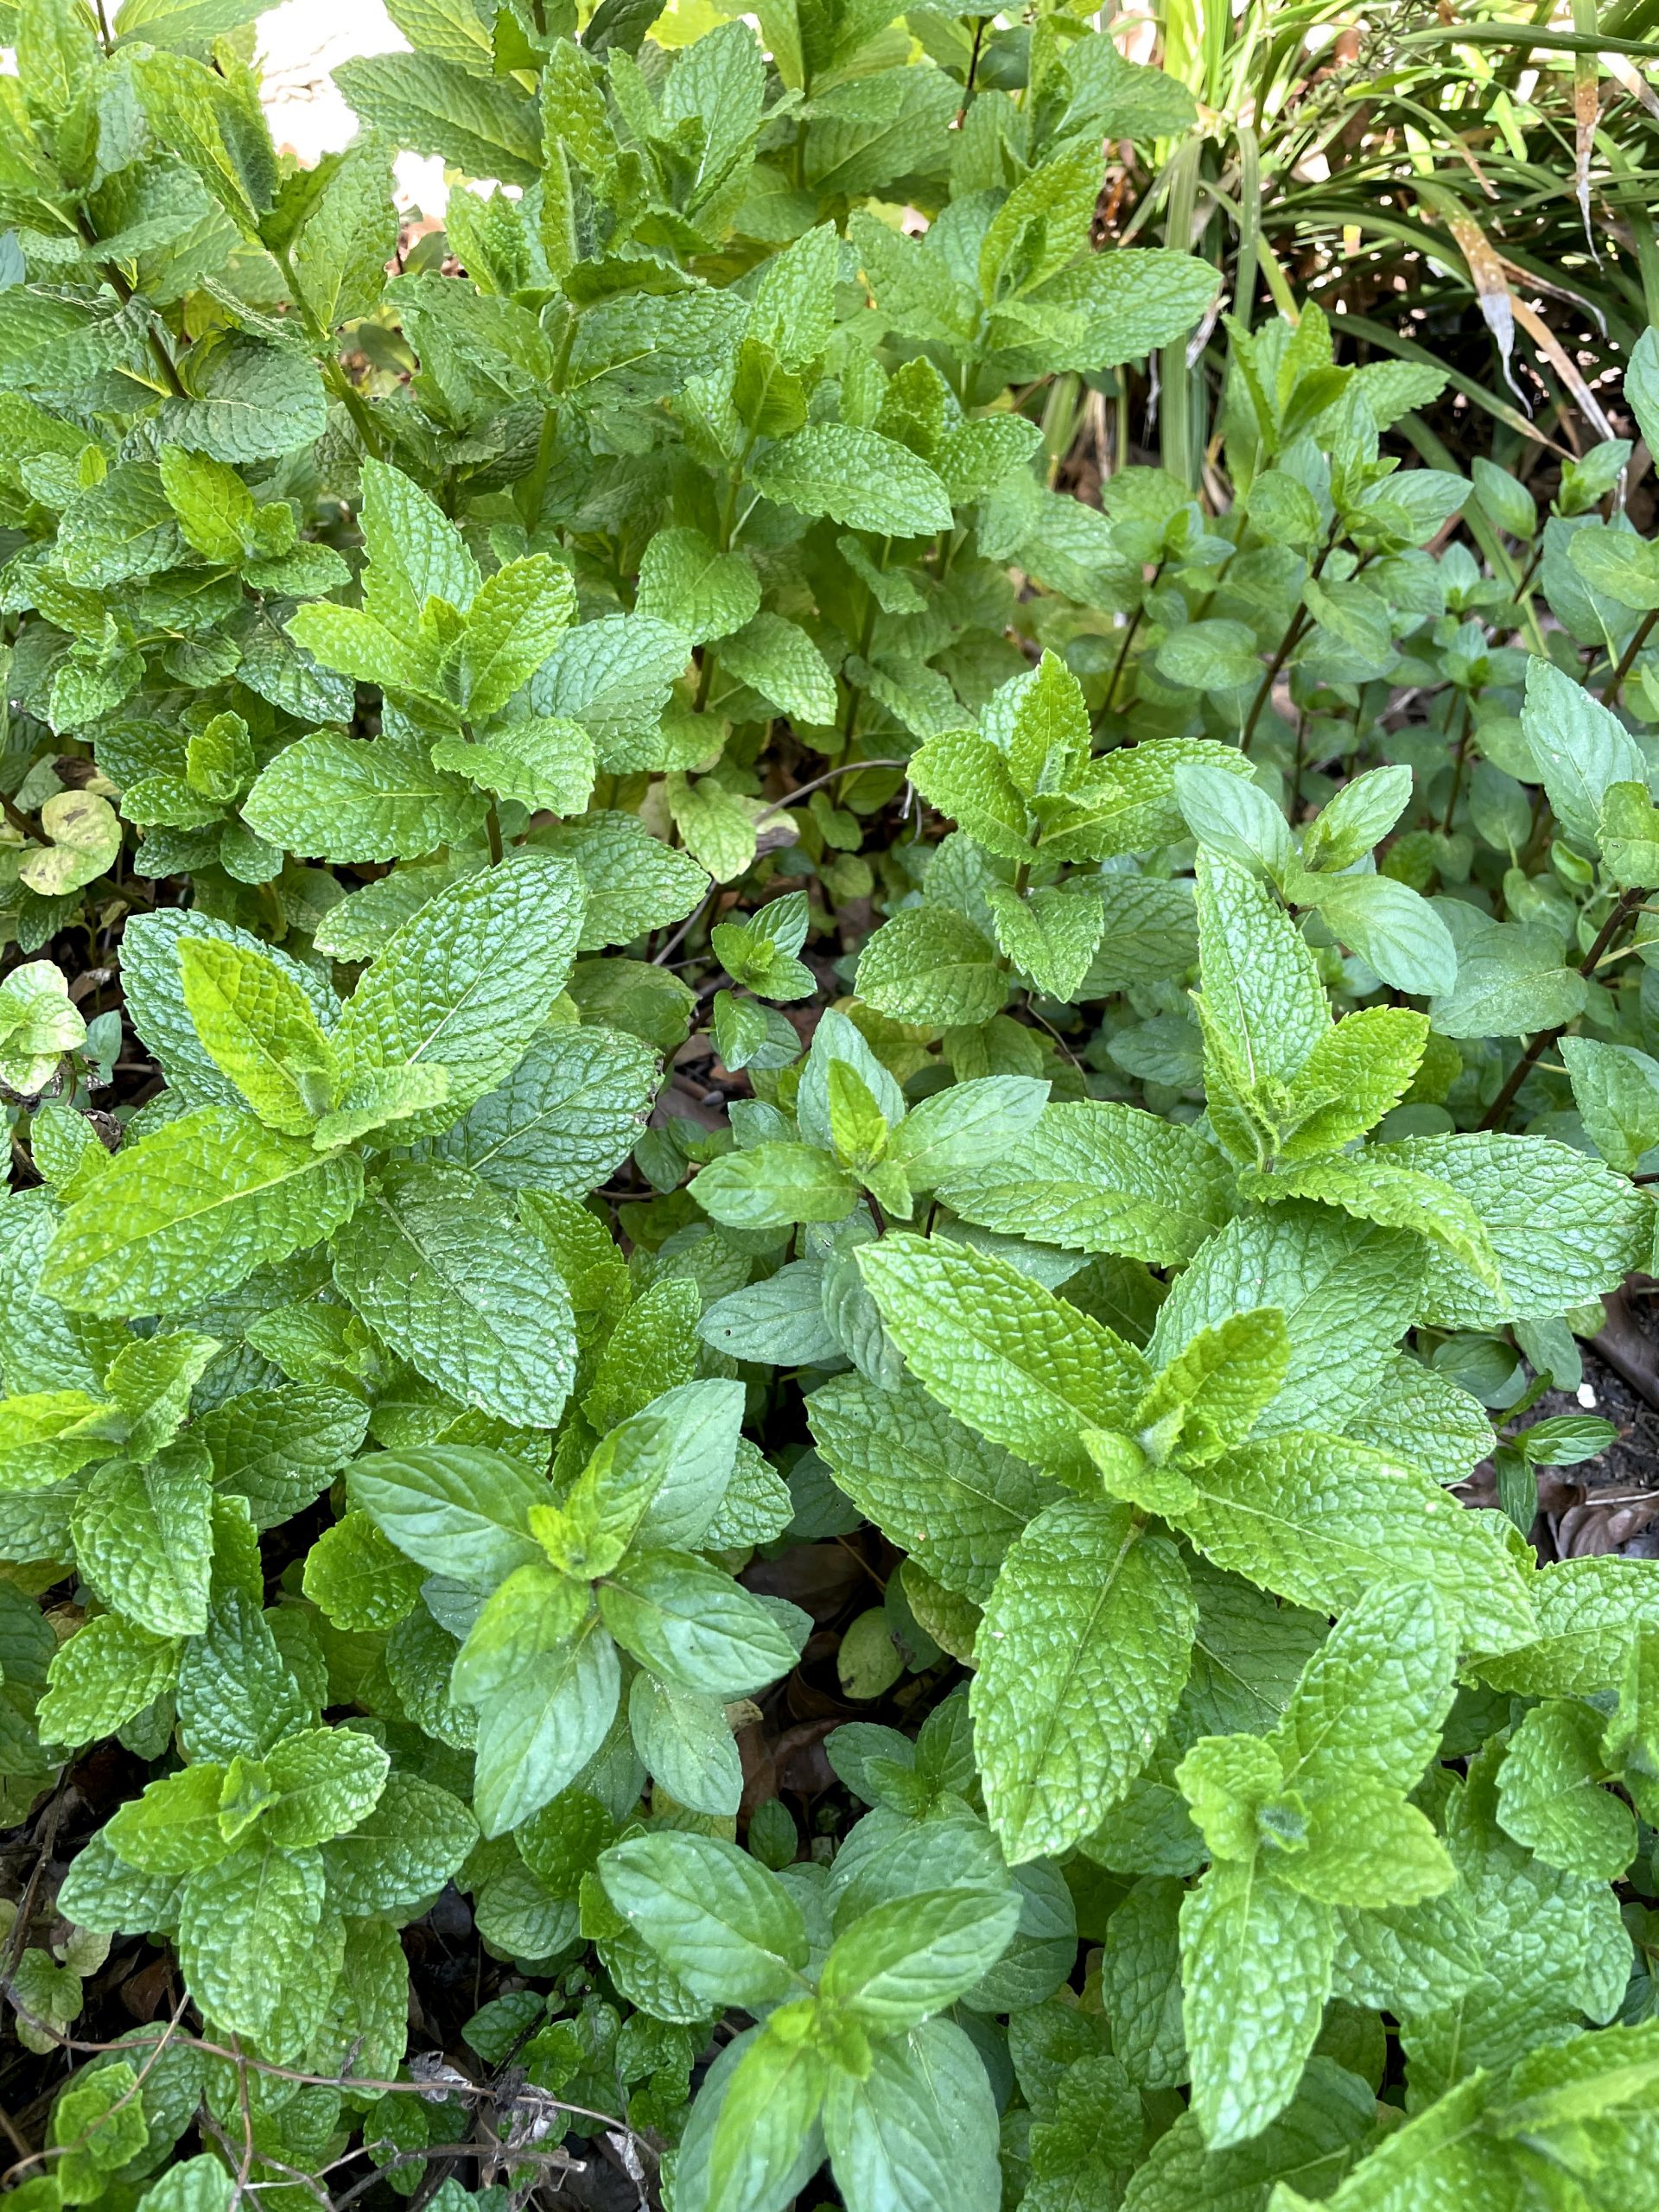 Mint and peppermint plants